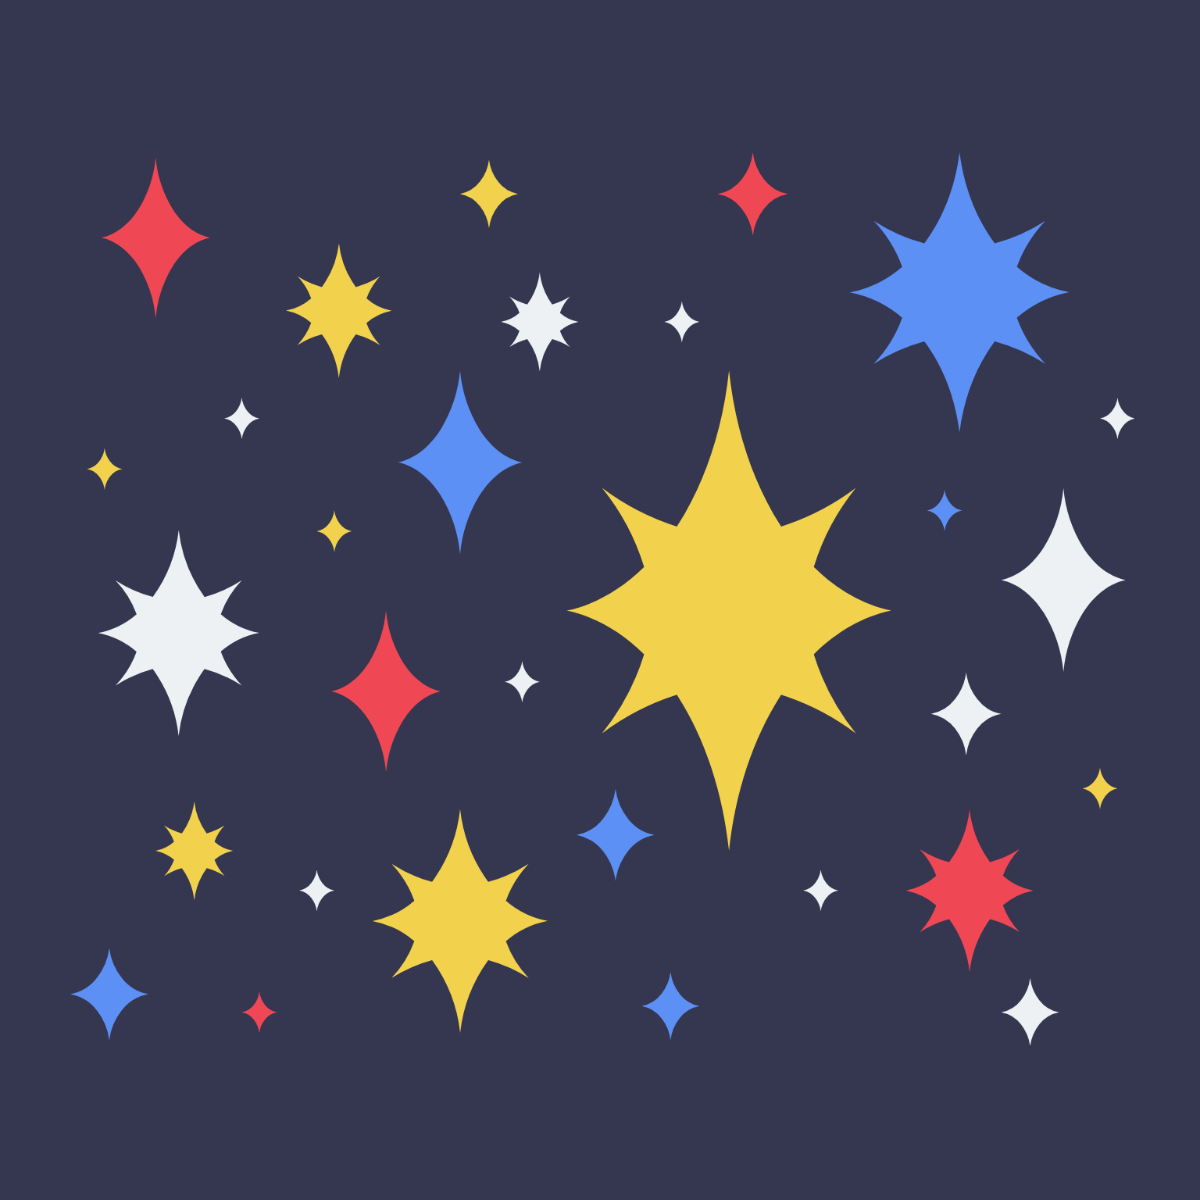 Free Star Cluster Vector Template